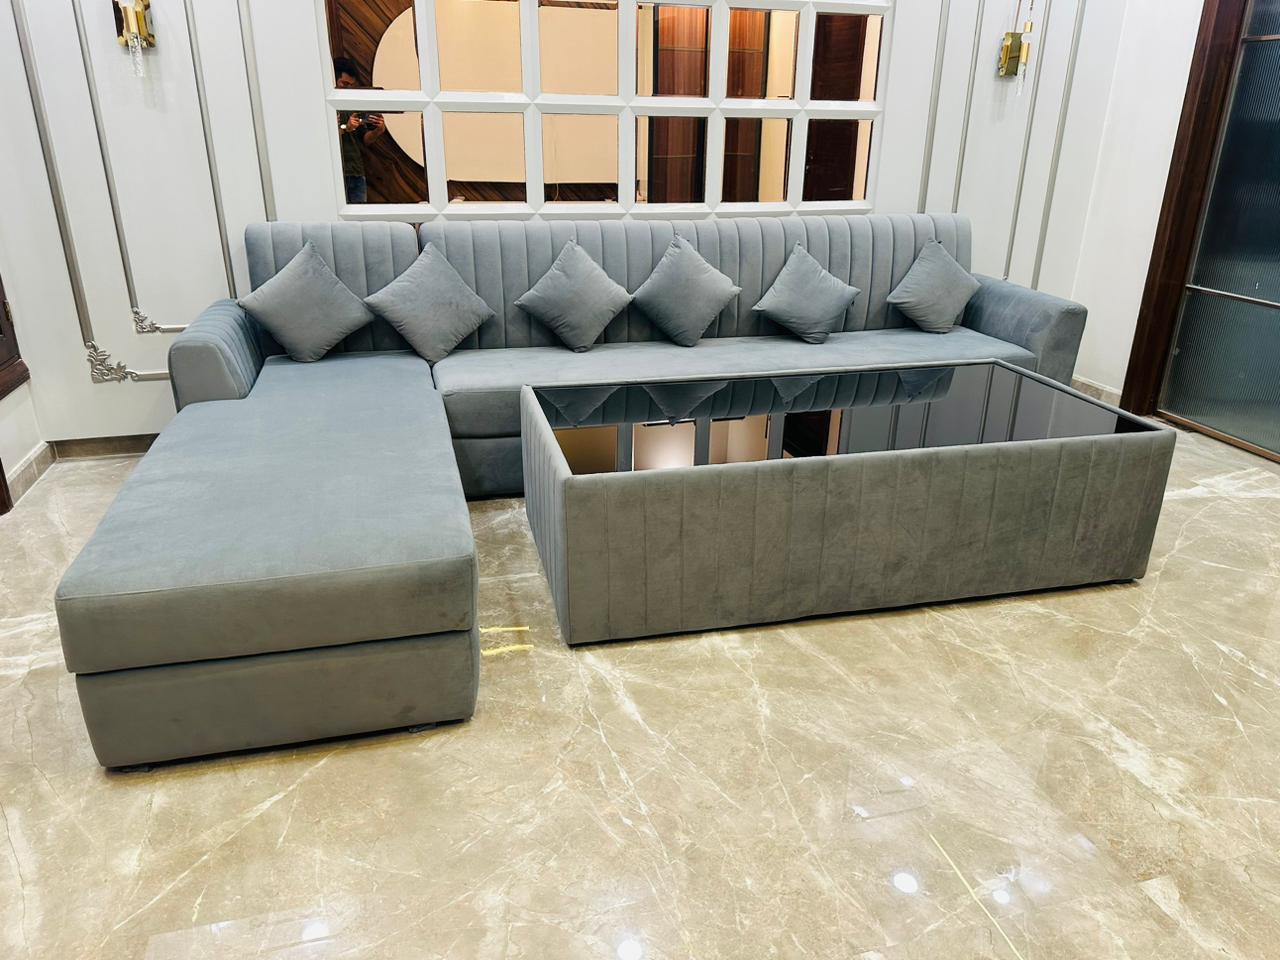 Upholstered 8 Seater Sofa With Centre Table